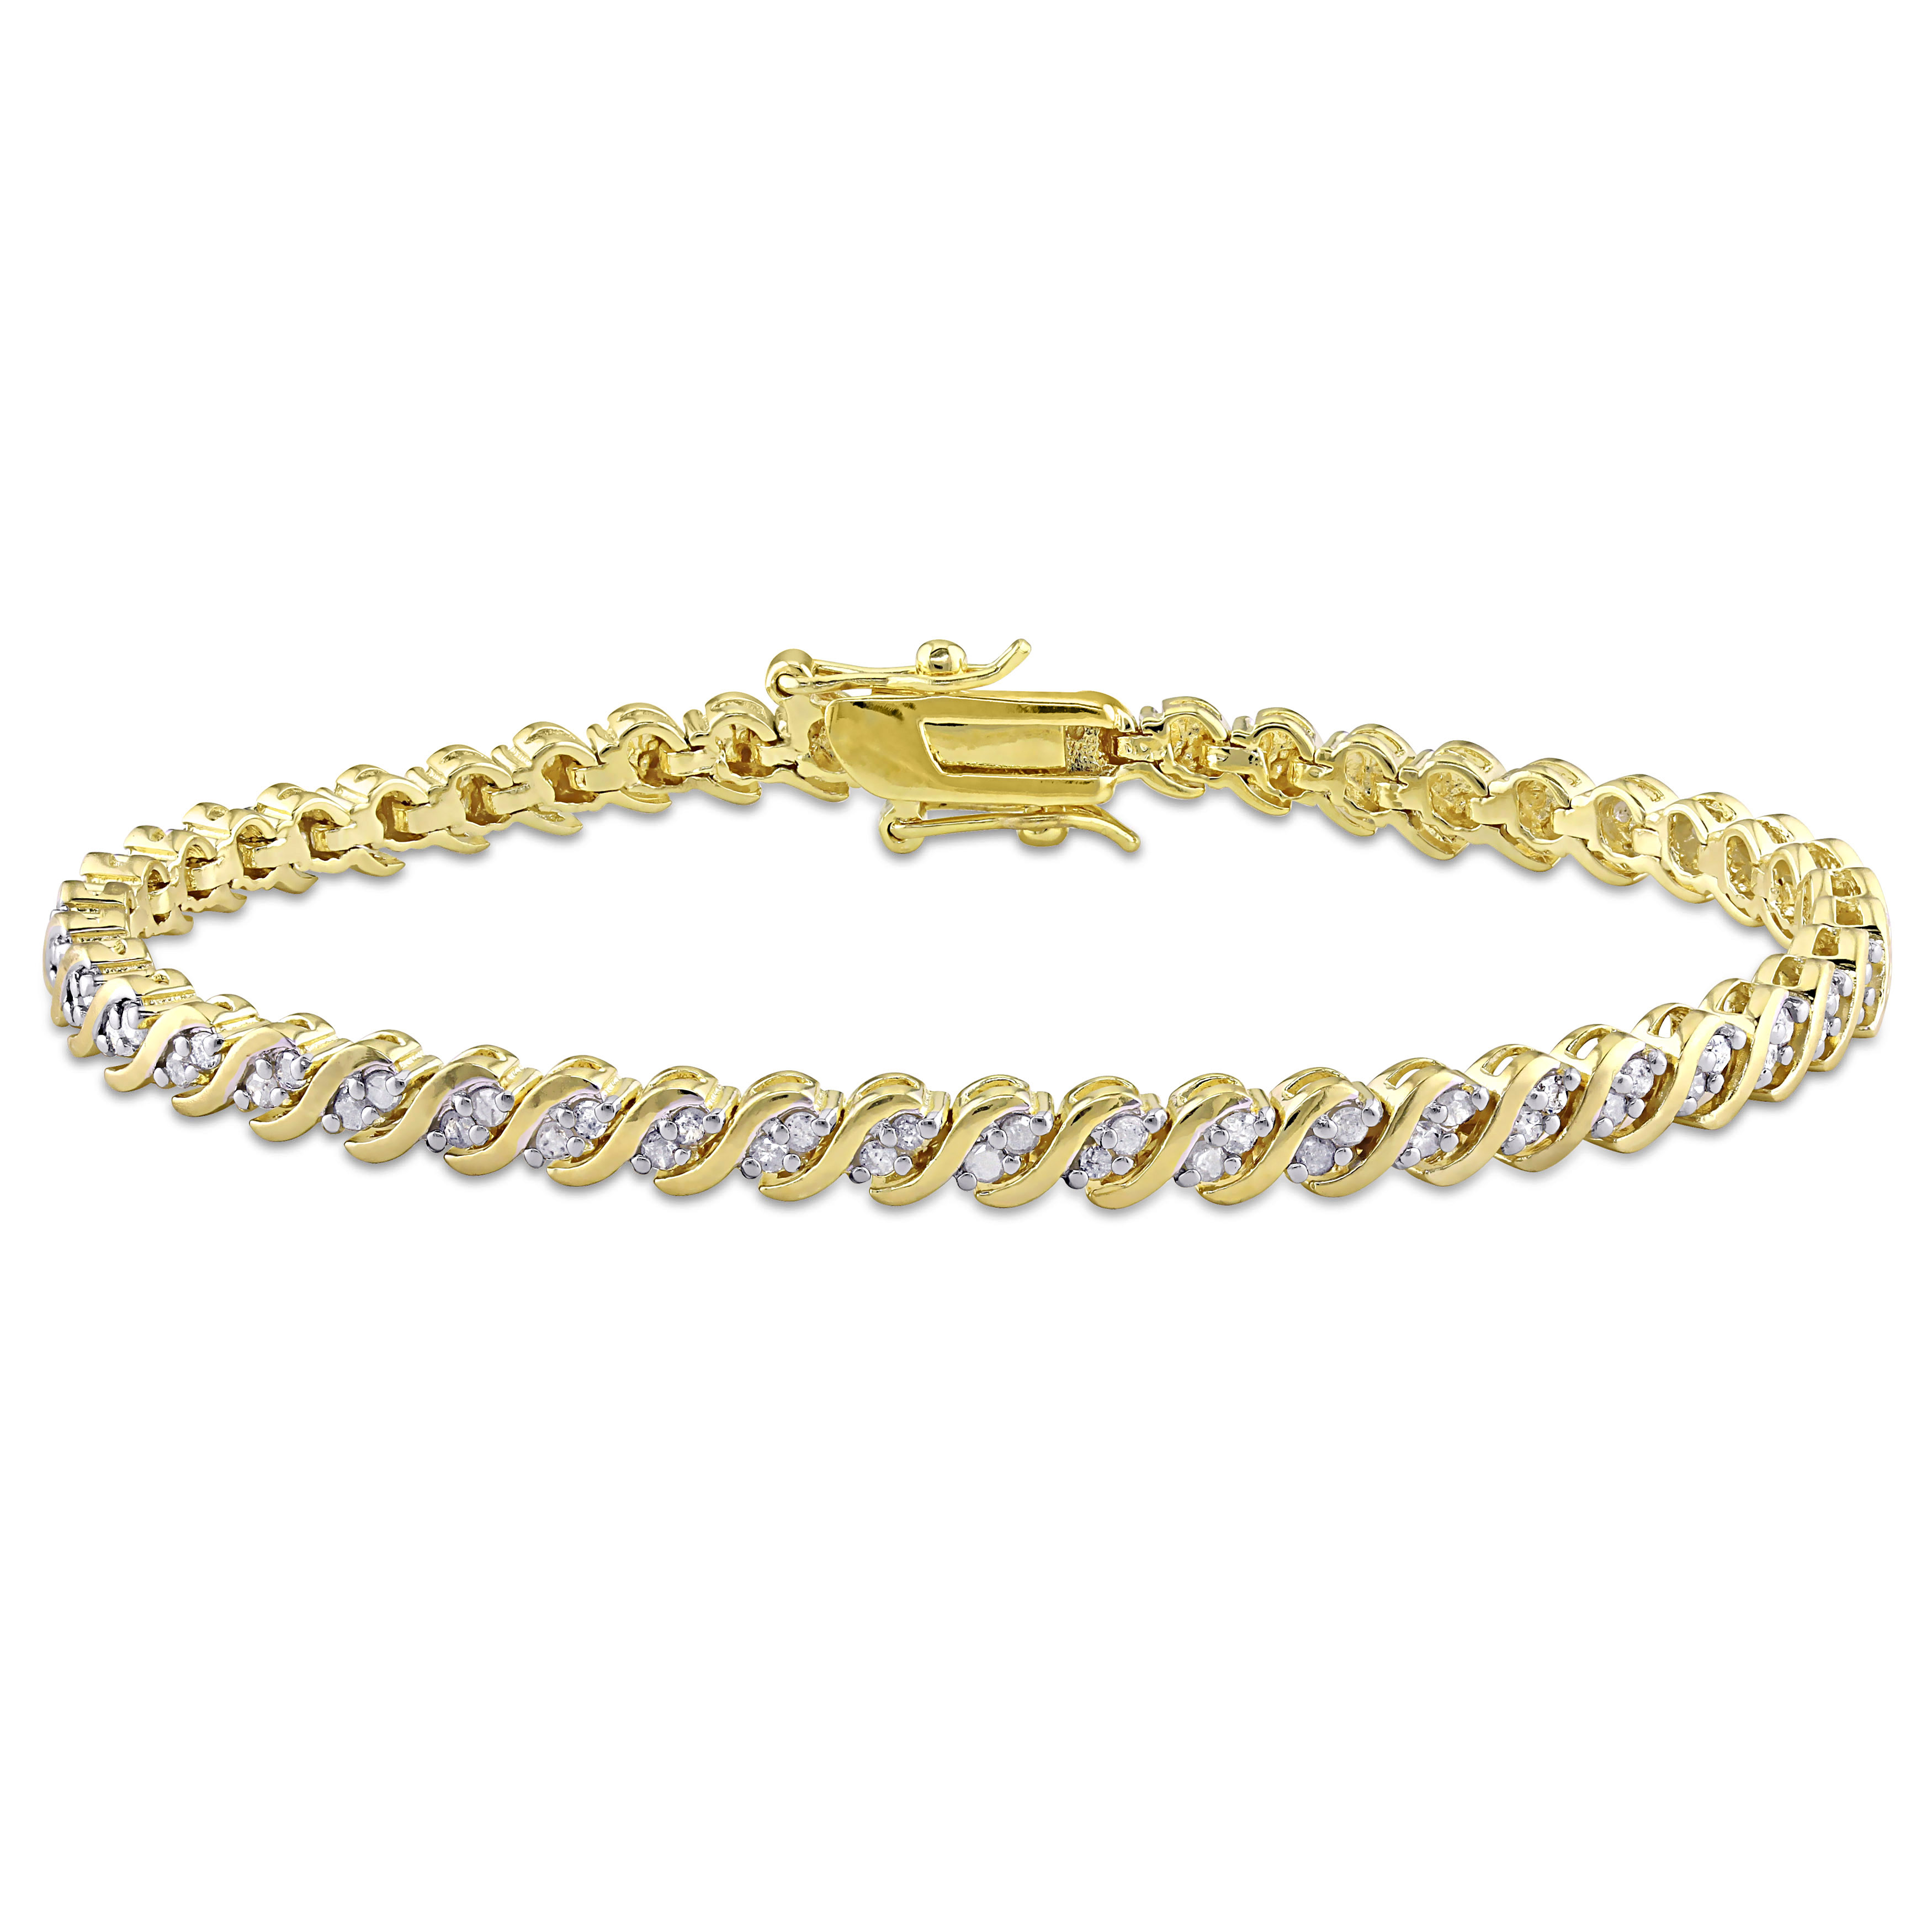 1 CT TW Diamond S Link Tennis Bracelet in Yellow Plated Sterling Silver - 7.5 in.